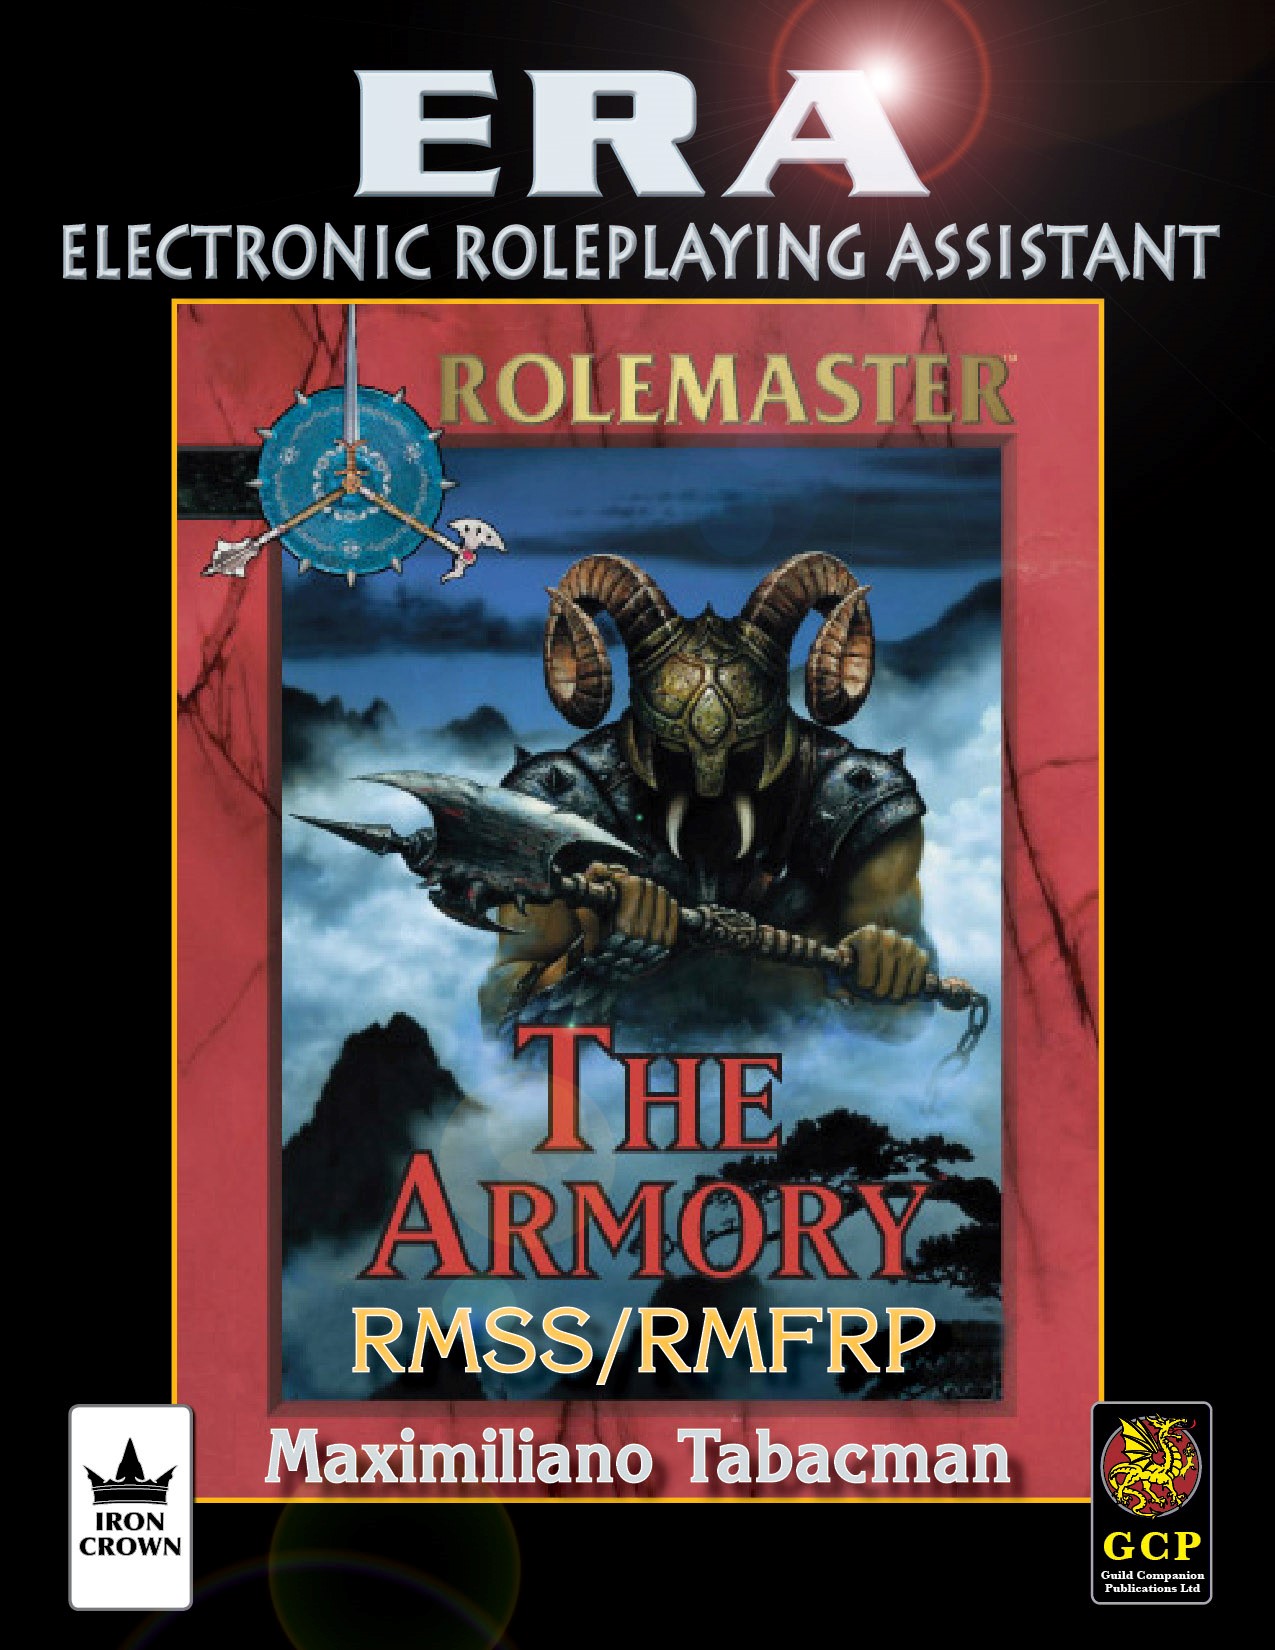 ERA for Rolemaster Armory for Rolemaster Fantasy Role Playing